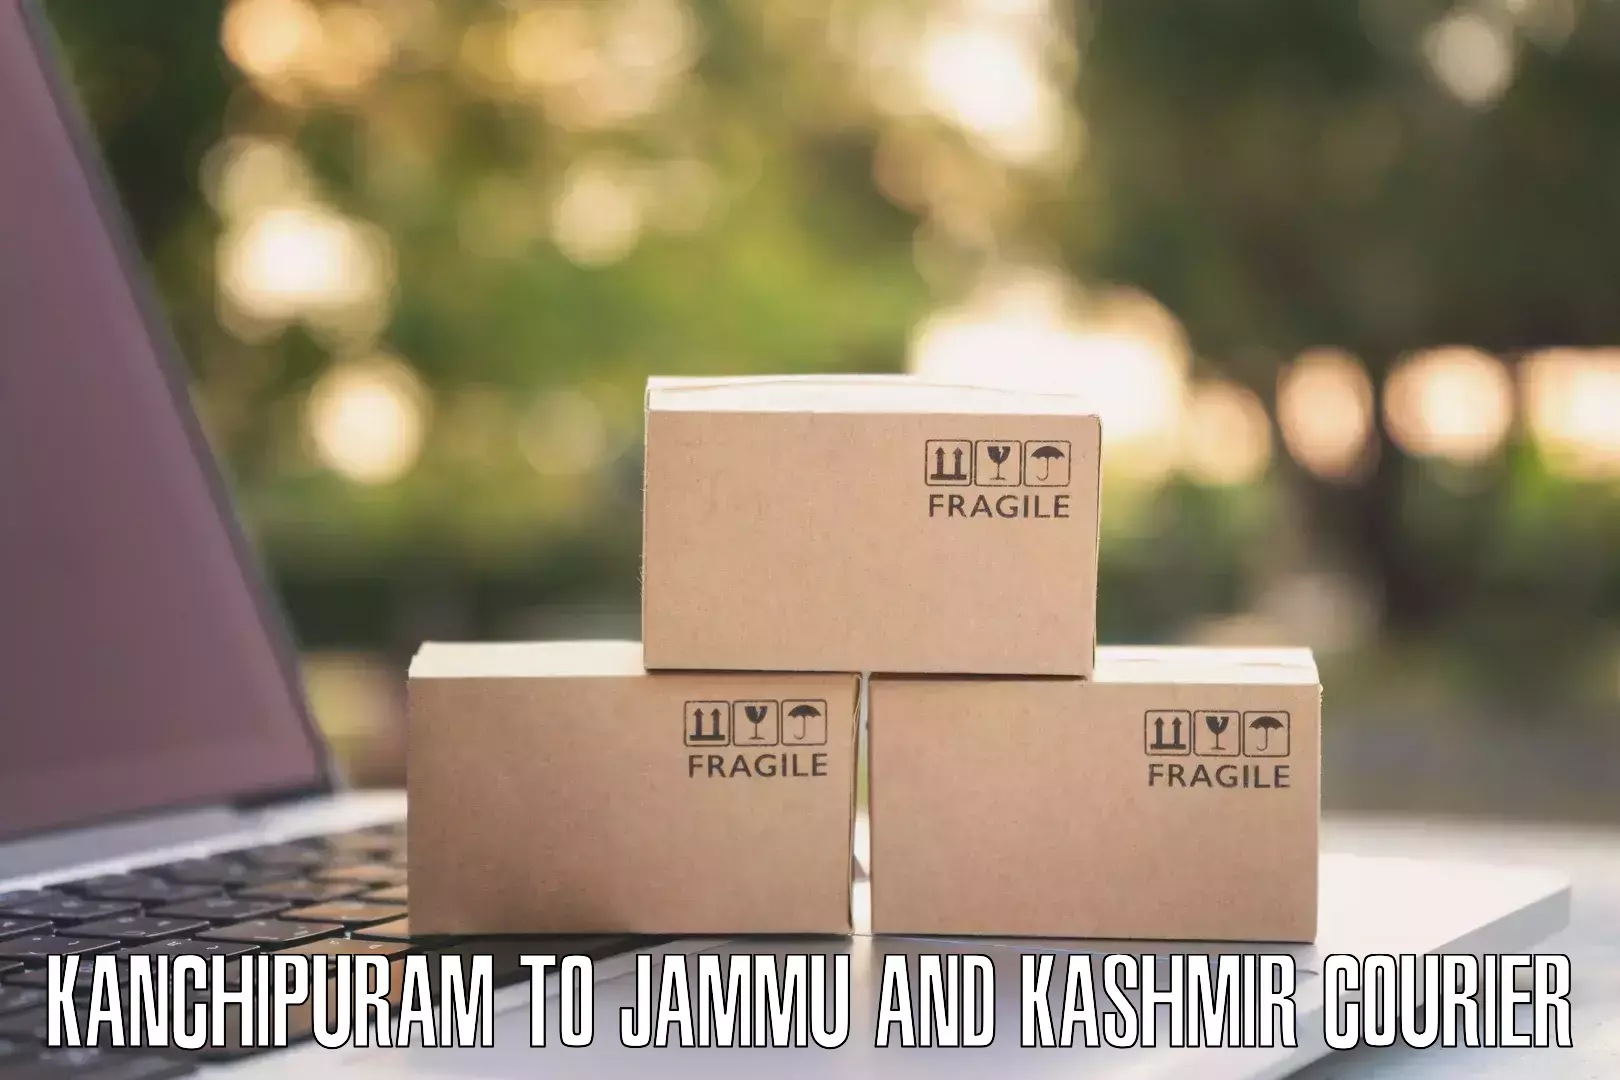 Easy access courier services Kanchipuram to Pulwama